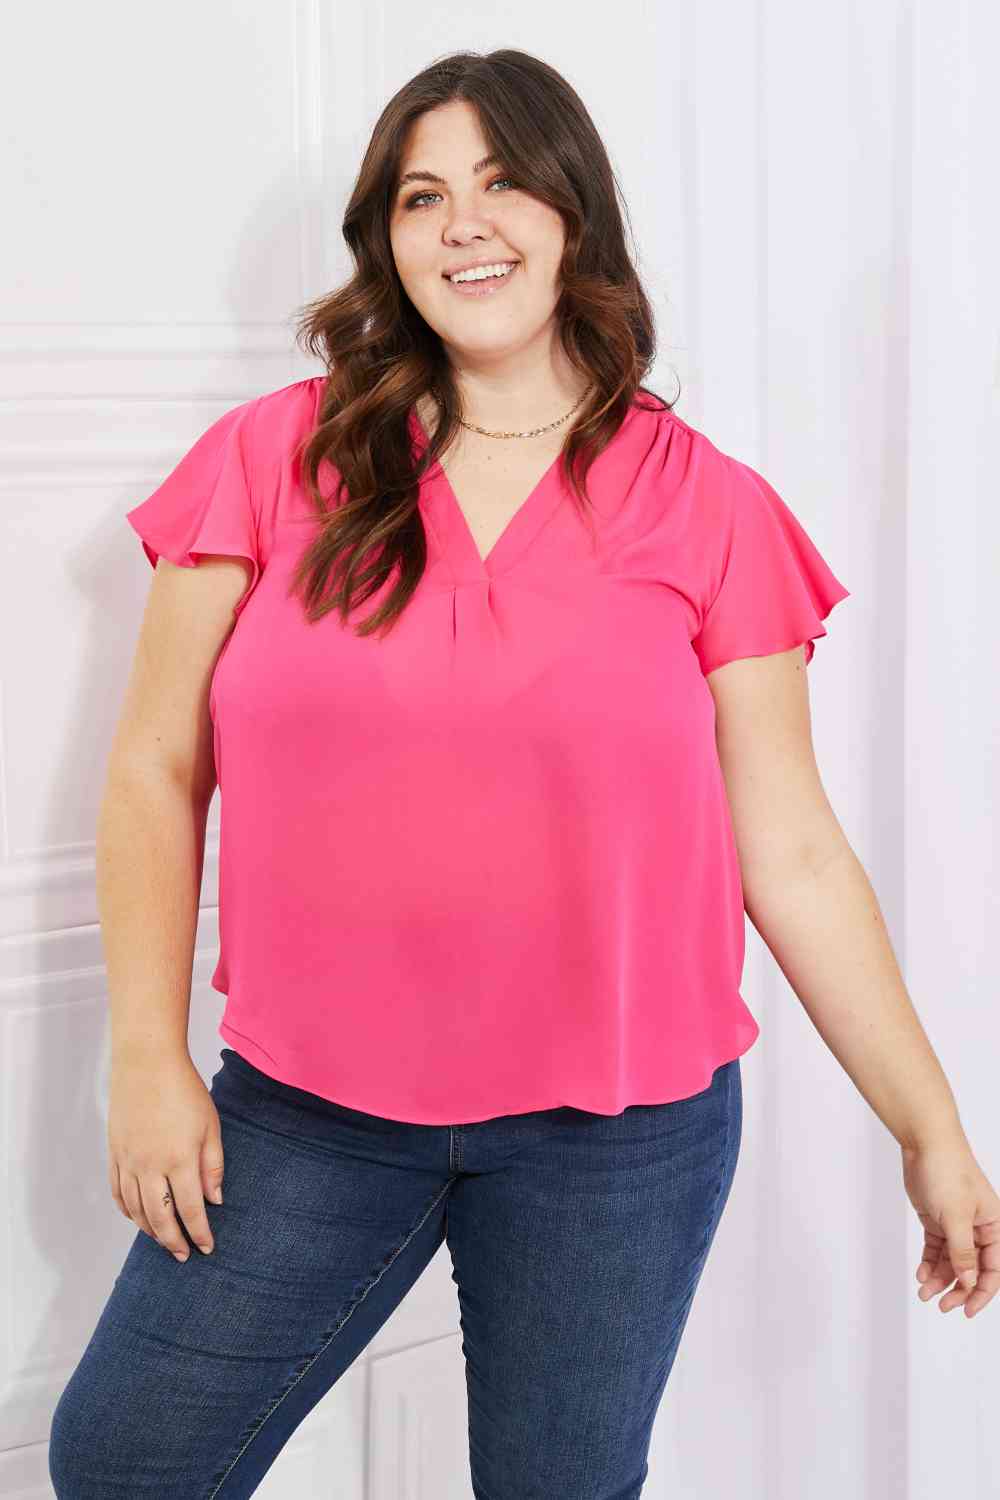 Sew In Love Just For You Full Size Short Ruffled Sleeve Length Top in Hot Pink Hot Pink